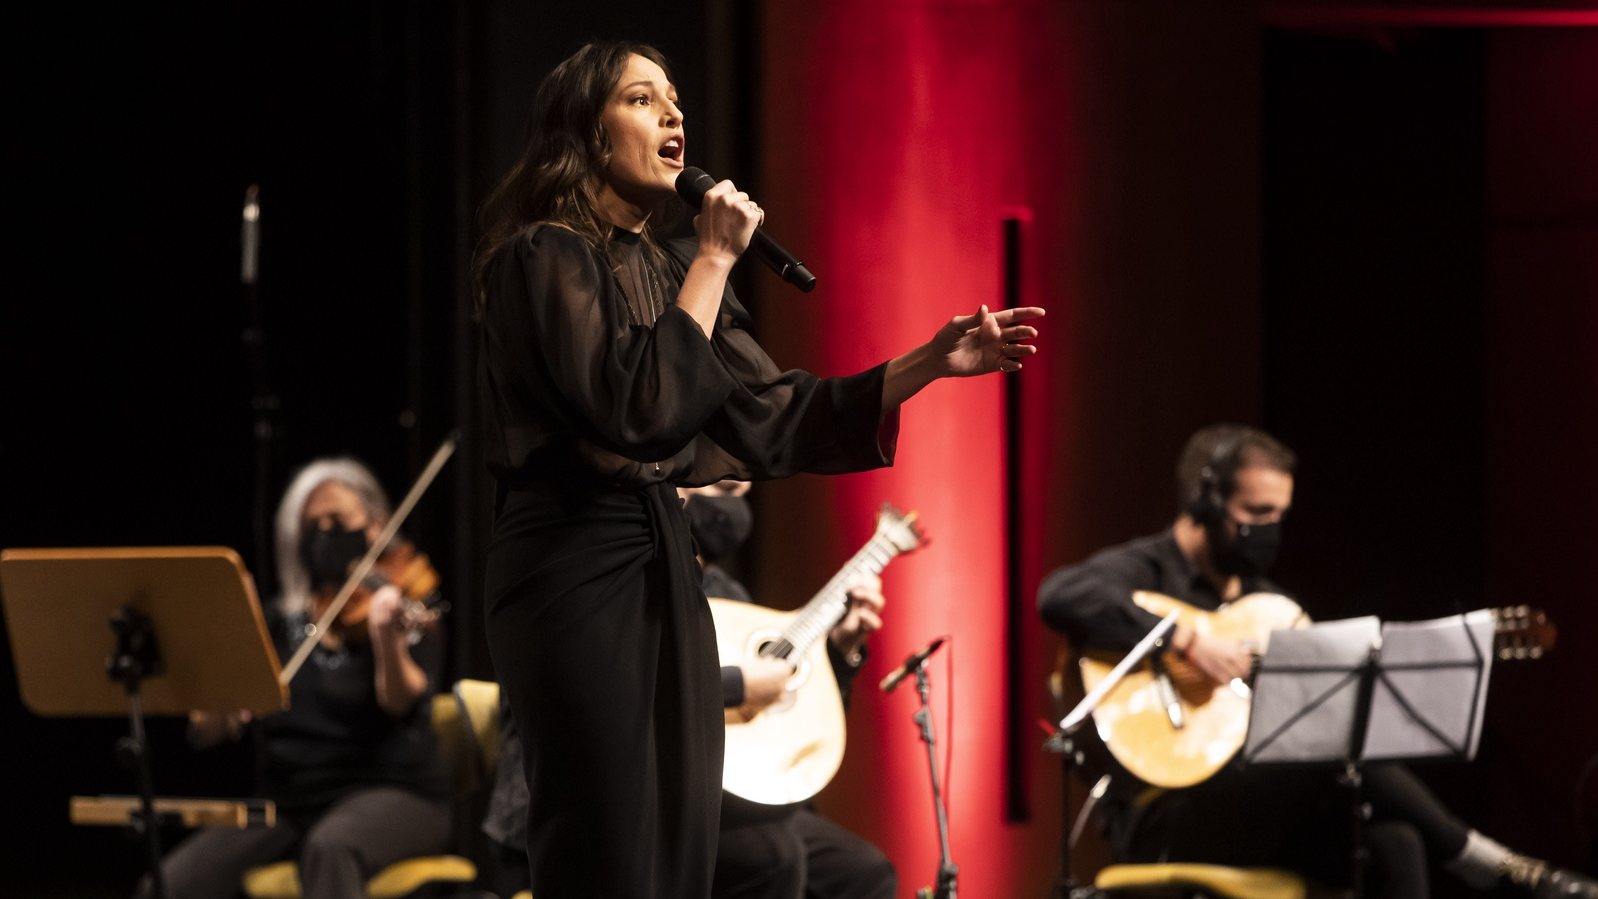 Portuguese Fado singer Carminho performs during a concert in honor of portuguese Fado Legend Amalia Rodrigues, that marks the opening of the Portuguese Presidency of the Council of the European Union in Lisbon, Portugal, 05 January 2021. During the first half of this year, Portugal will have its fourth presidency after 1992, 2000 and 2007. JOSE SENA GOULAO/LUSA